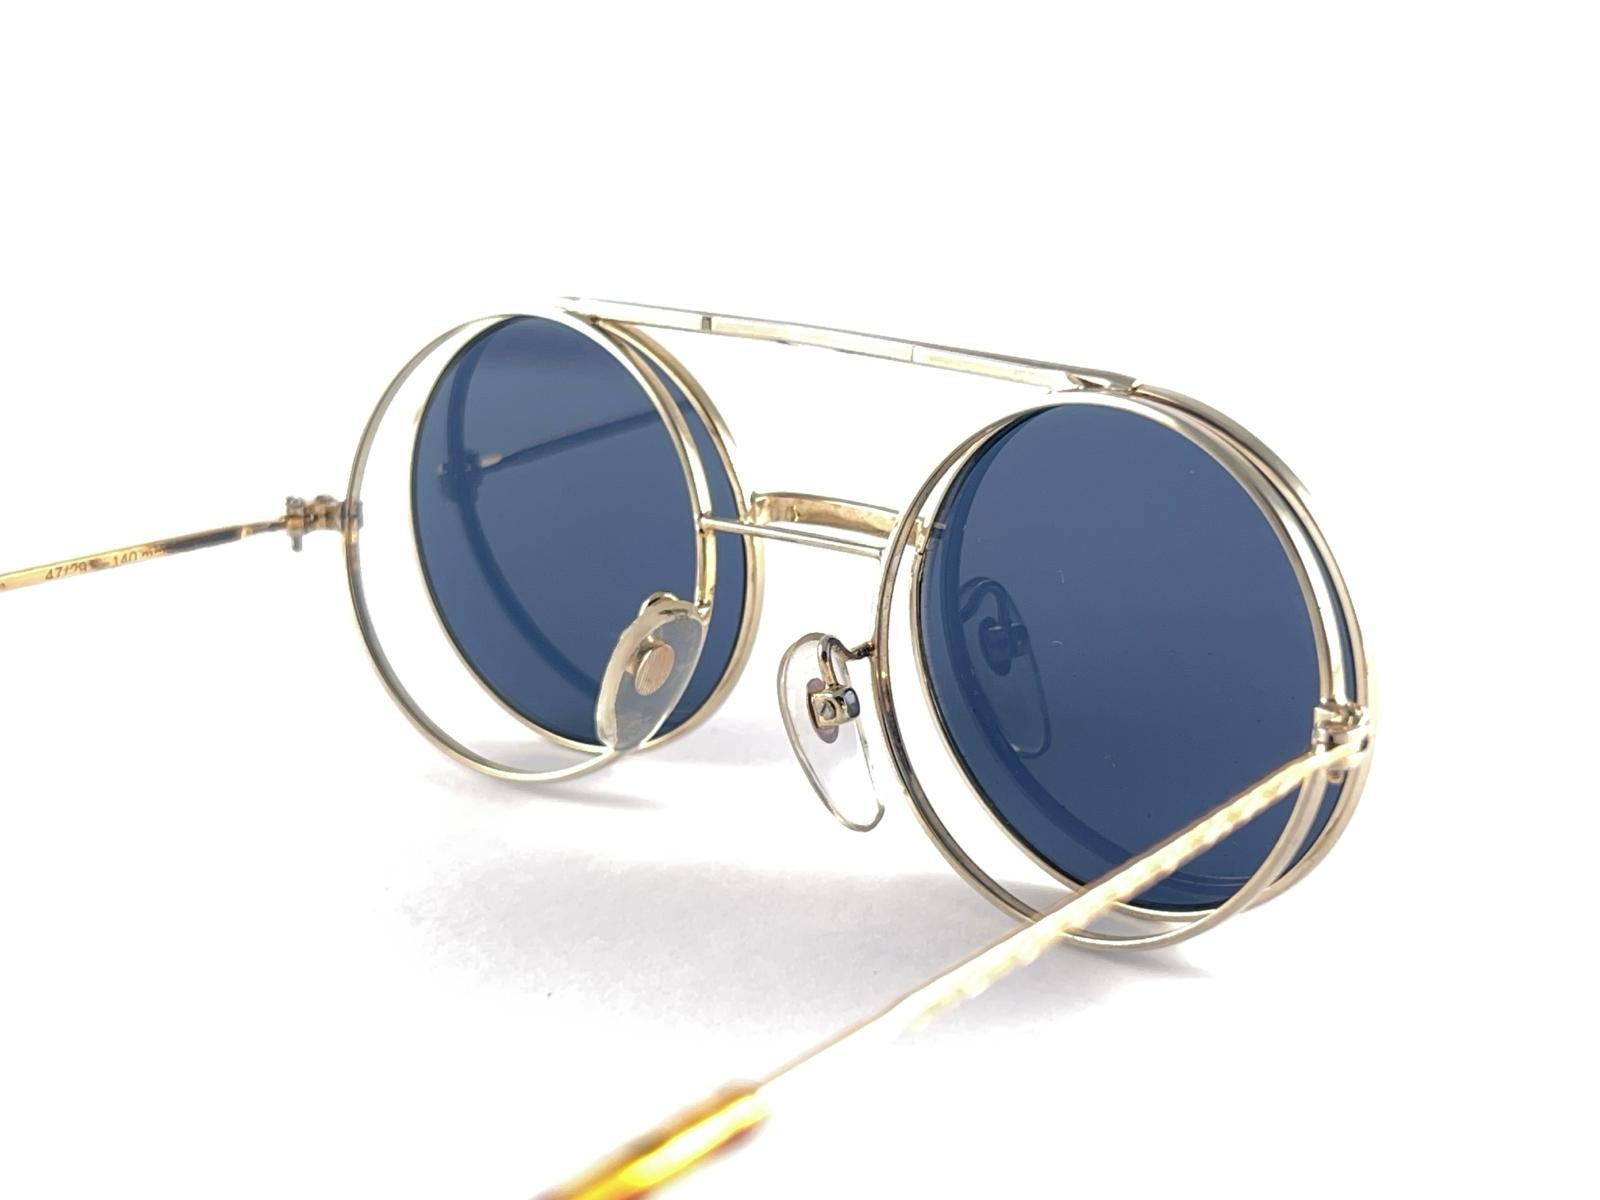 New Rare Vintage Kenzo 47/29 Hinged Silver & Gold Sunglasses 1980's Japan For Sale 4